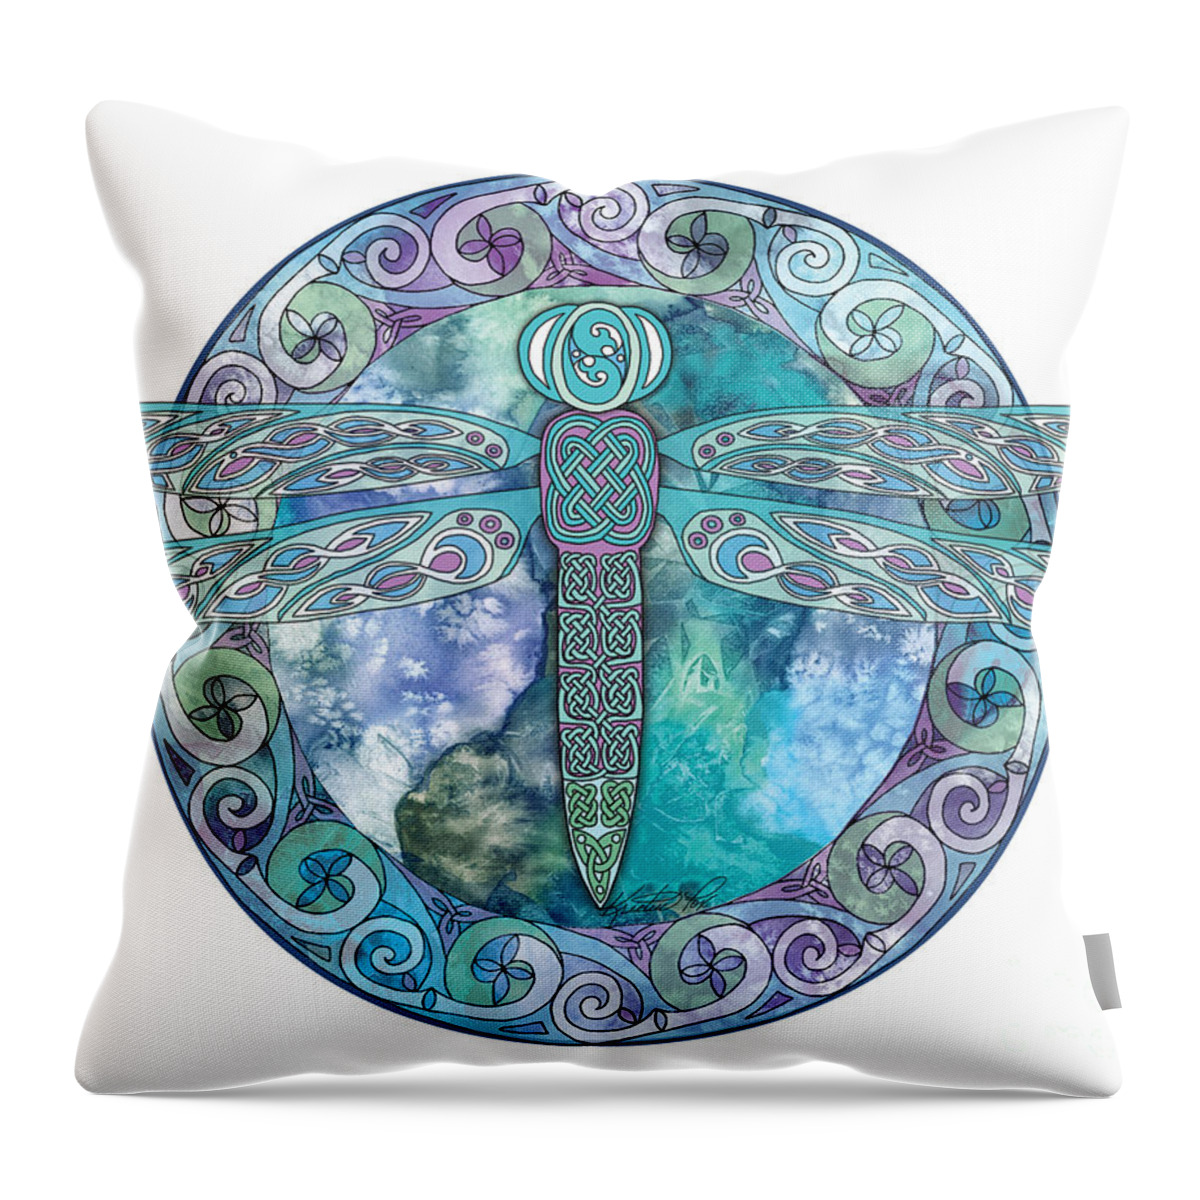 Artoffoxvox Throw Pillow featuring the mixed media Cool Celtic Dragonfly by Kristen Fox